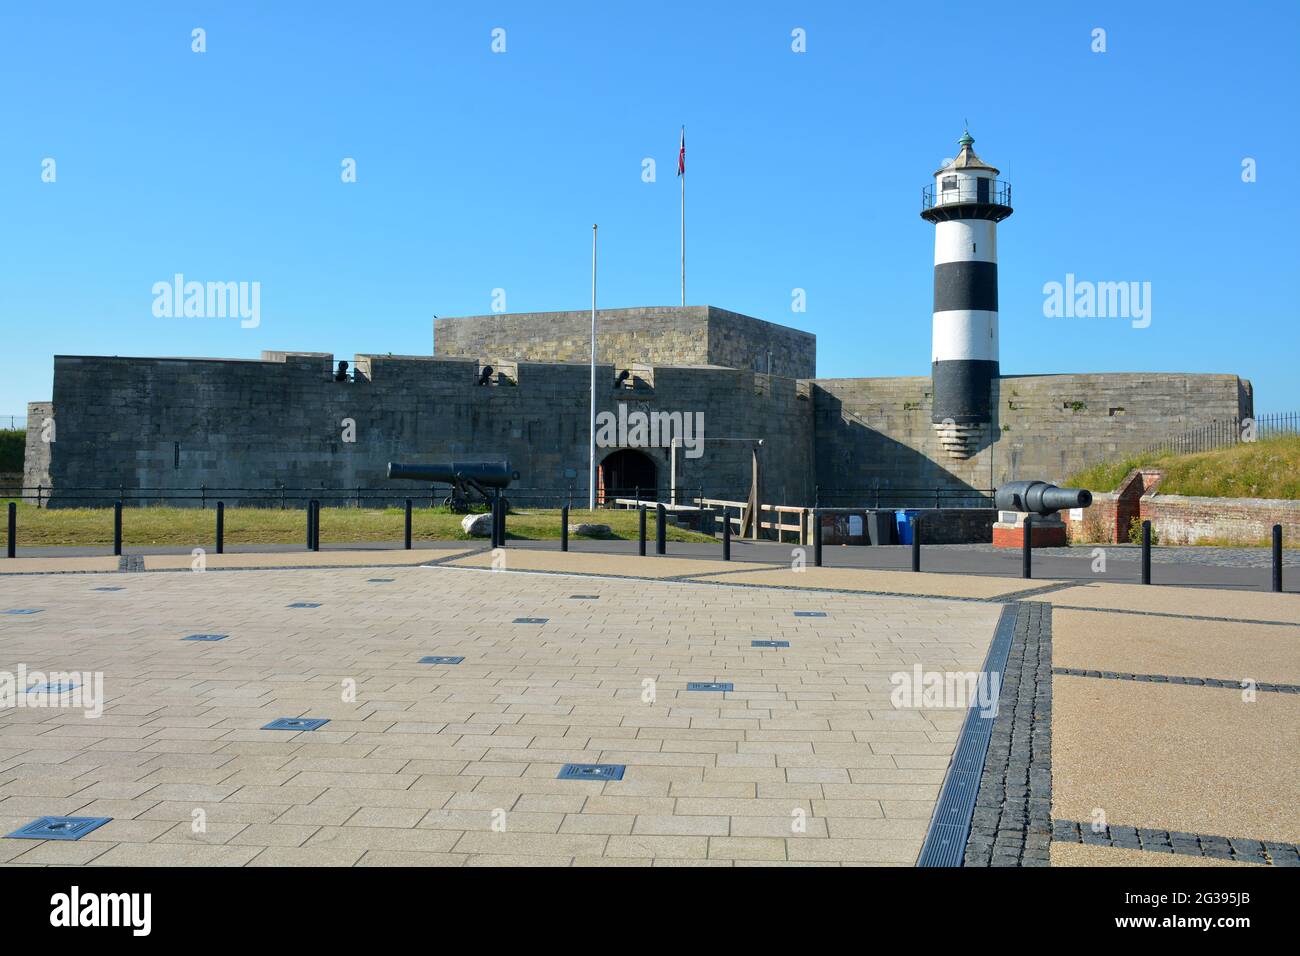 Entrance to Southsea castle on the seafront in Portsmouth,England. Medieval castle open to the public. Stock Photo